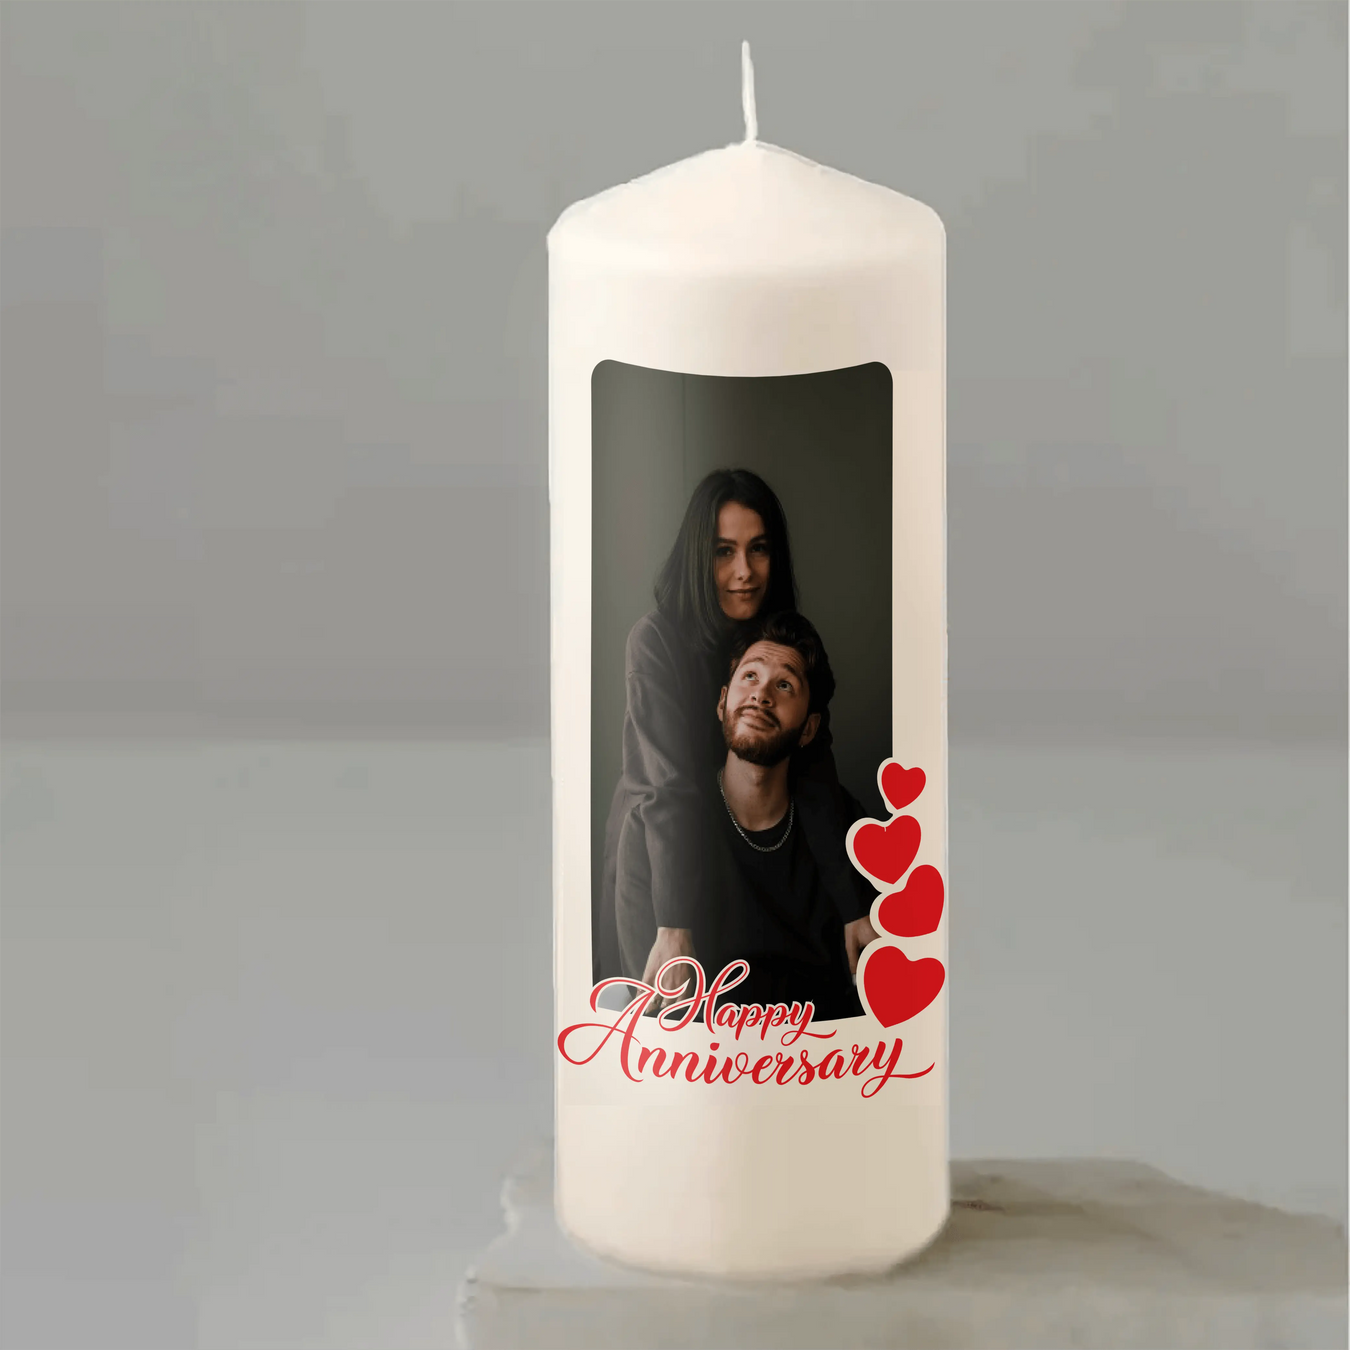 Photo candles